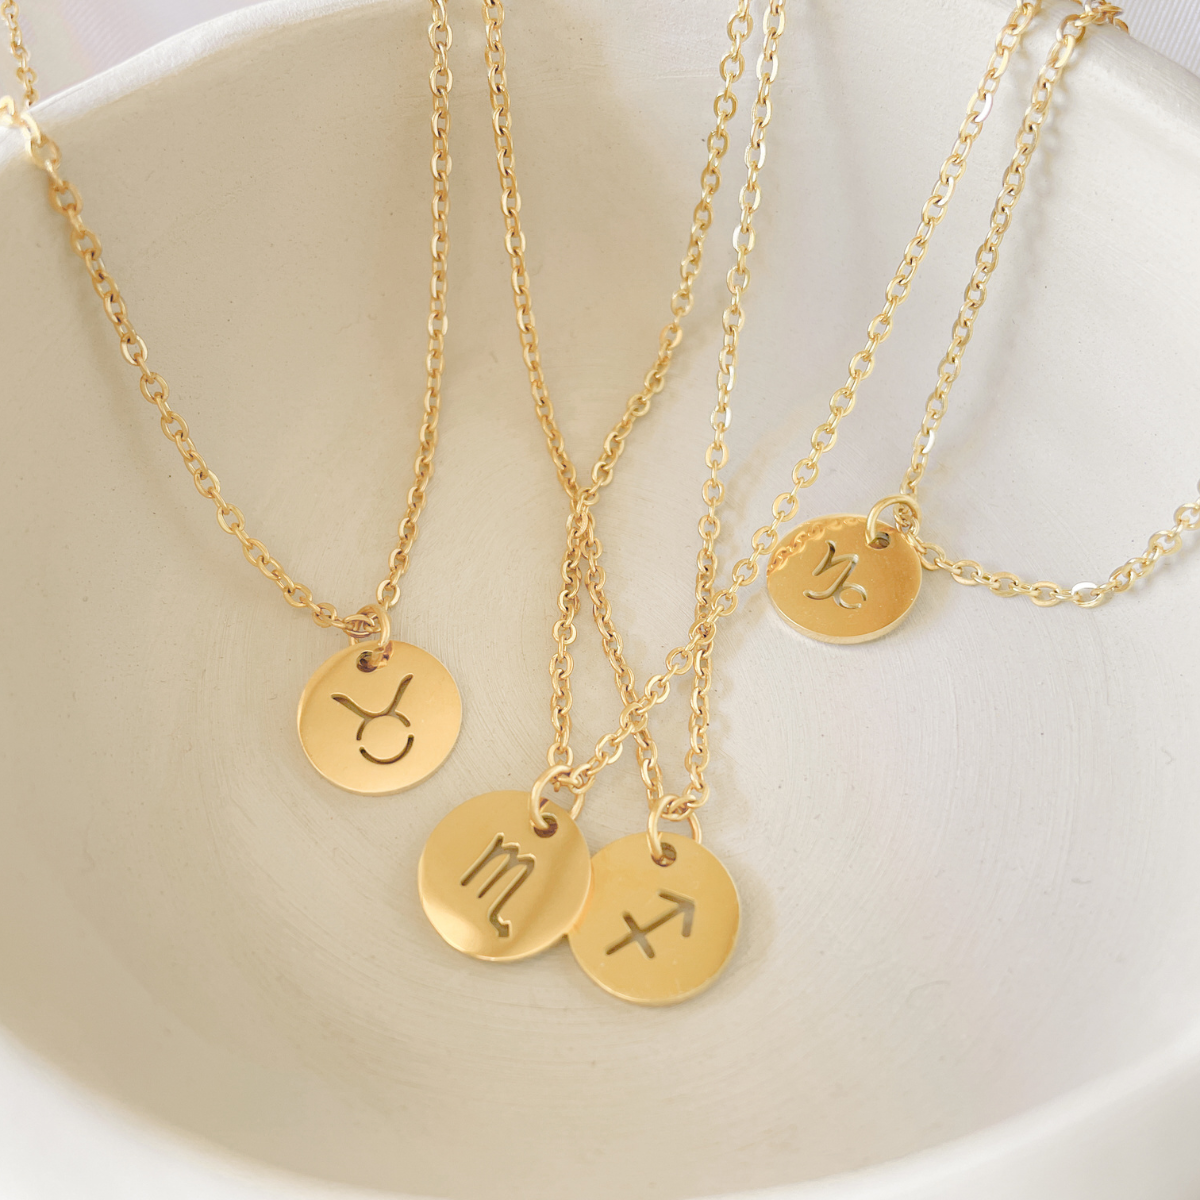 Gold monogramed circular pendants laying in a white bowl